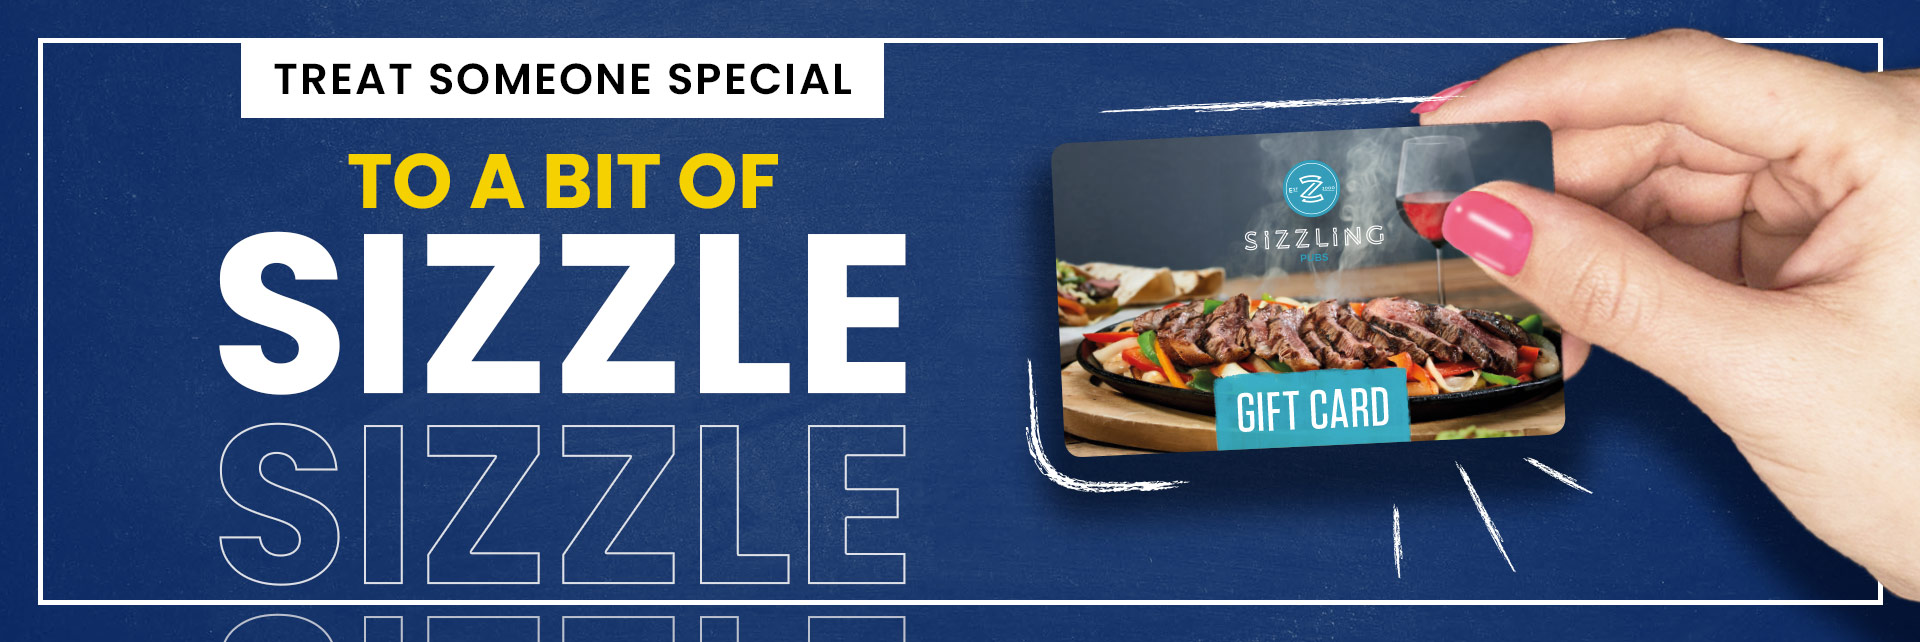 Sizzling Pubs Gift Card at The Belle Vue in Blackpool